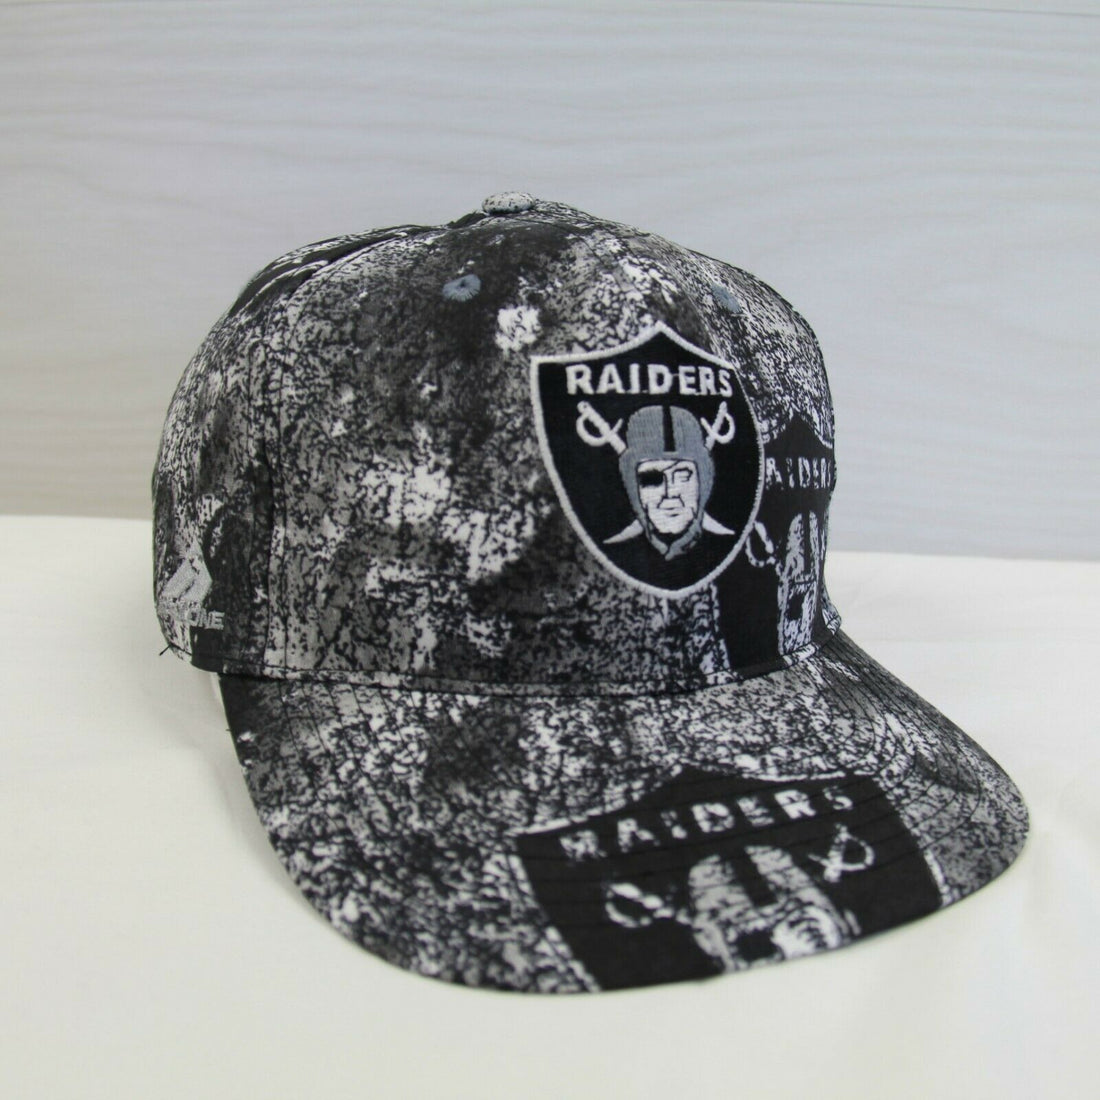 DS Vintage Oakland Raiders Apex One All Over Print Snapback Hat Size OSFA NFL